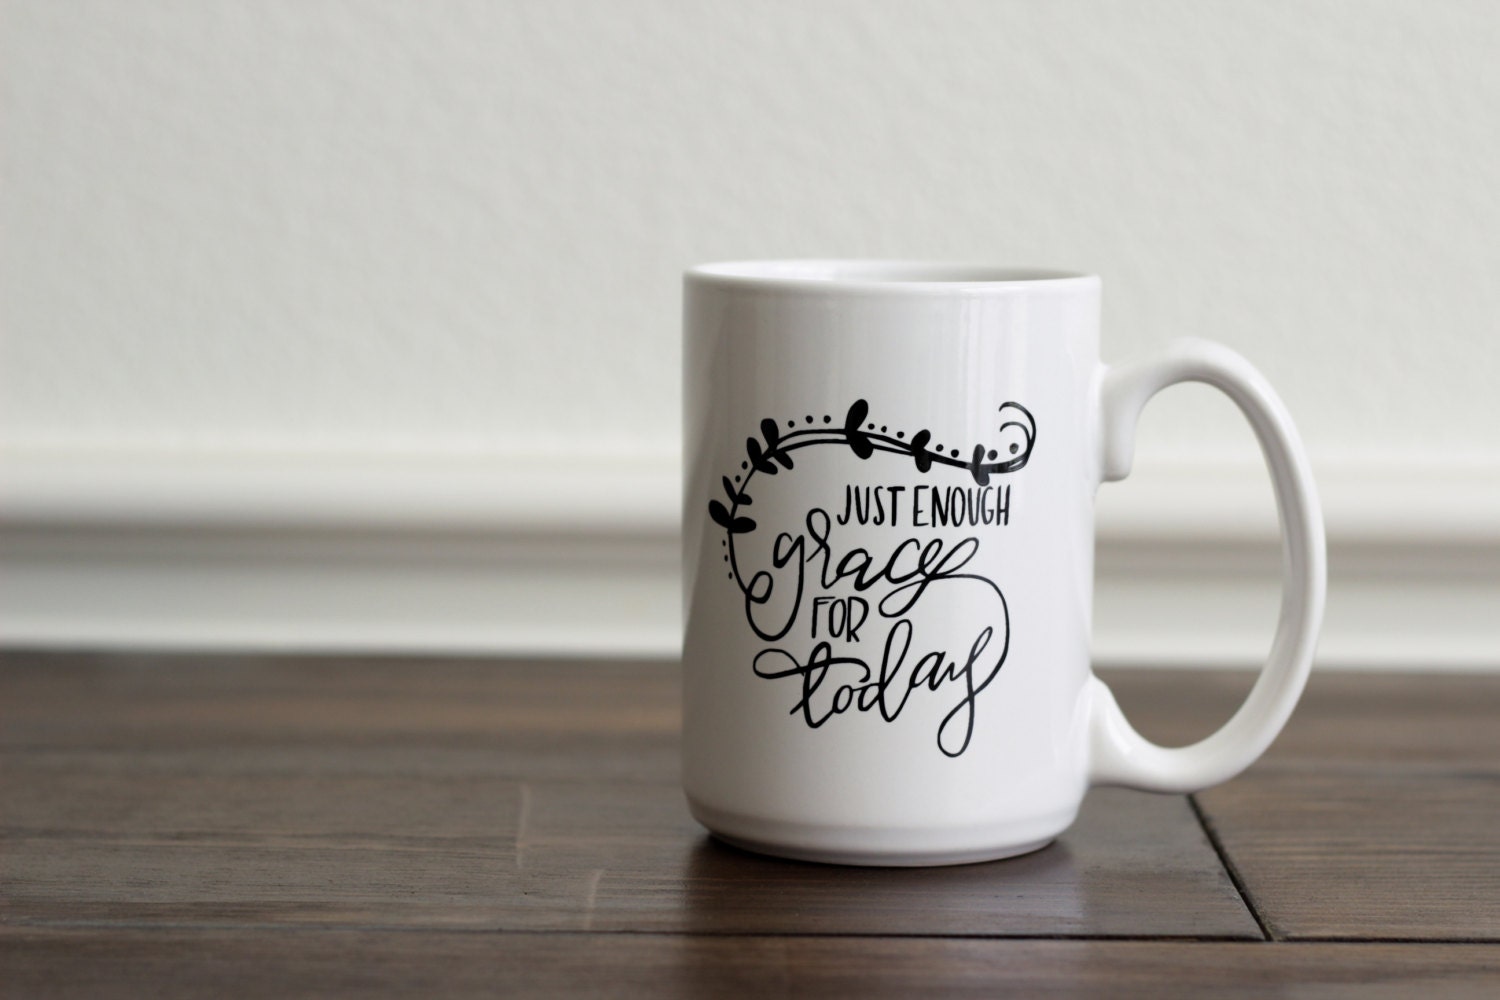 Coffee Mug Just Enough Grace for Today quote mug gifts